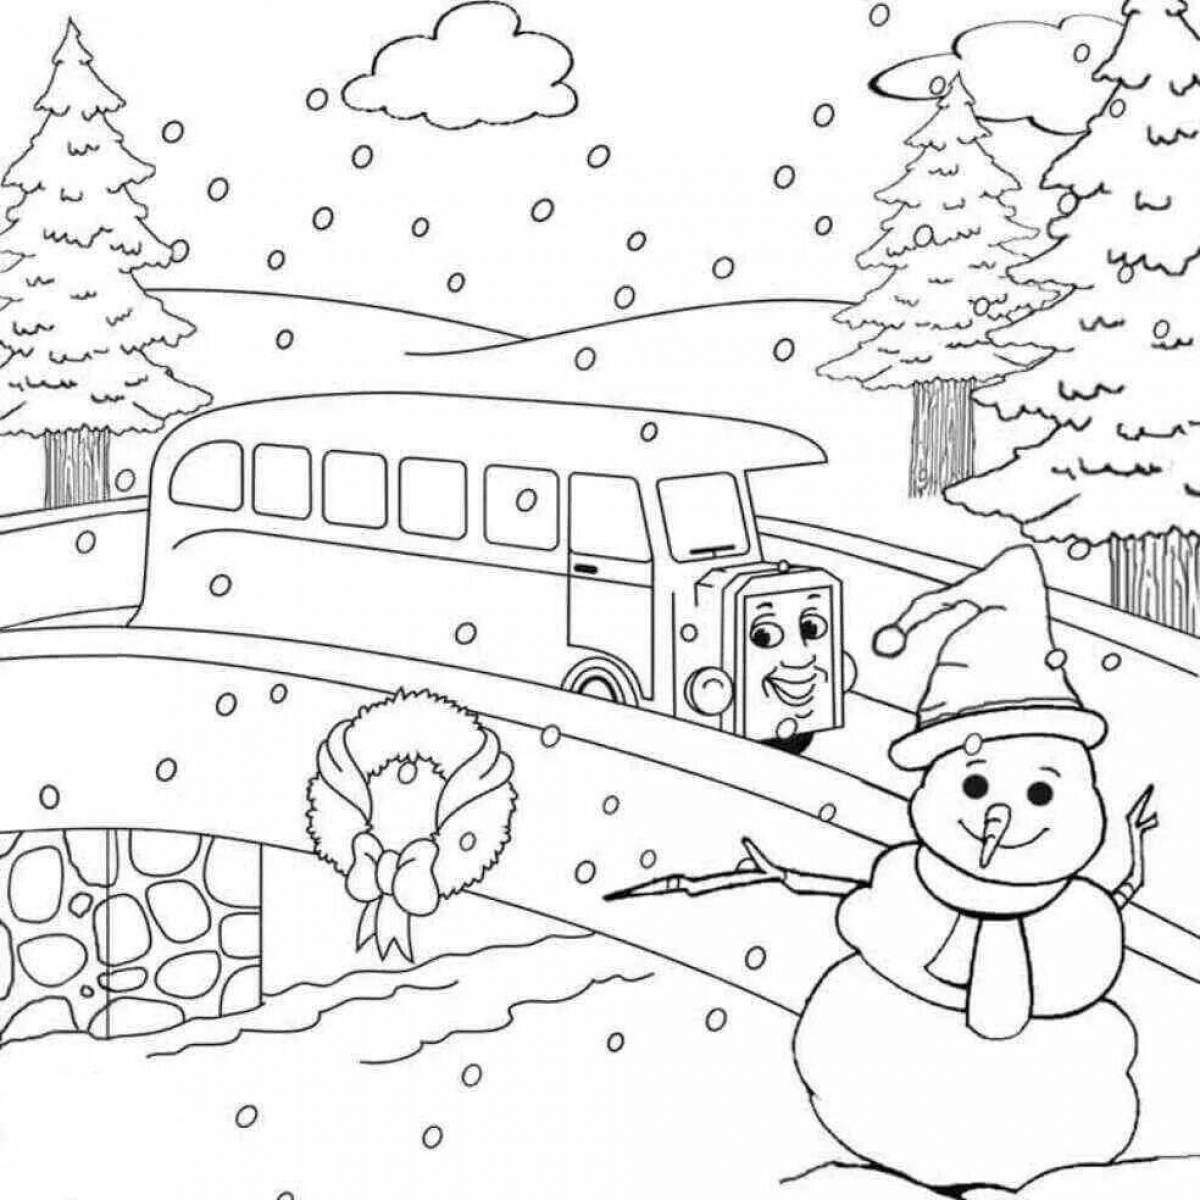 Dreamy winter forest coloring book for kids